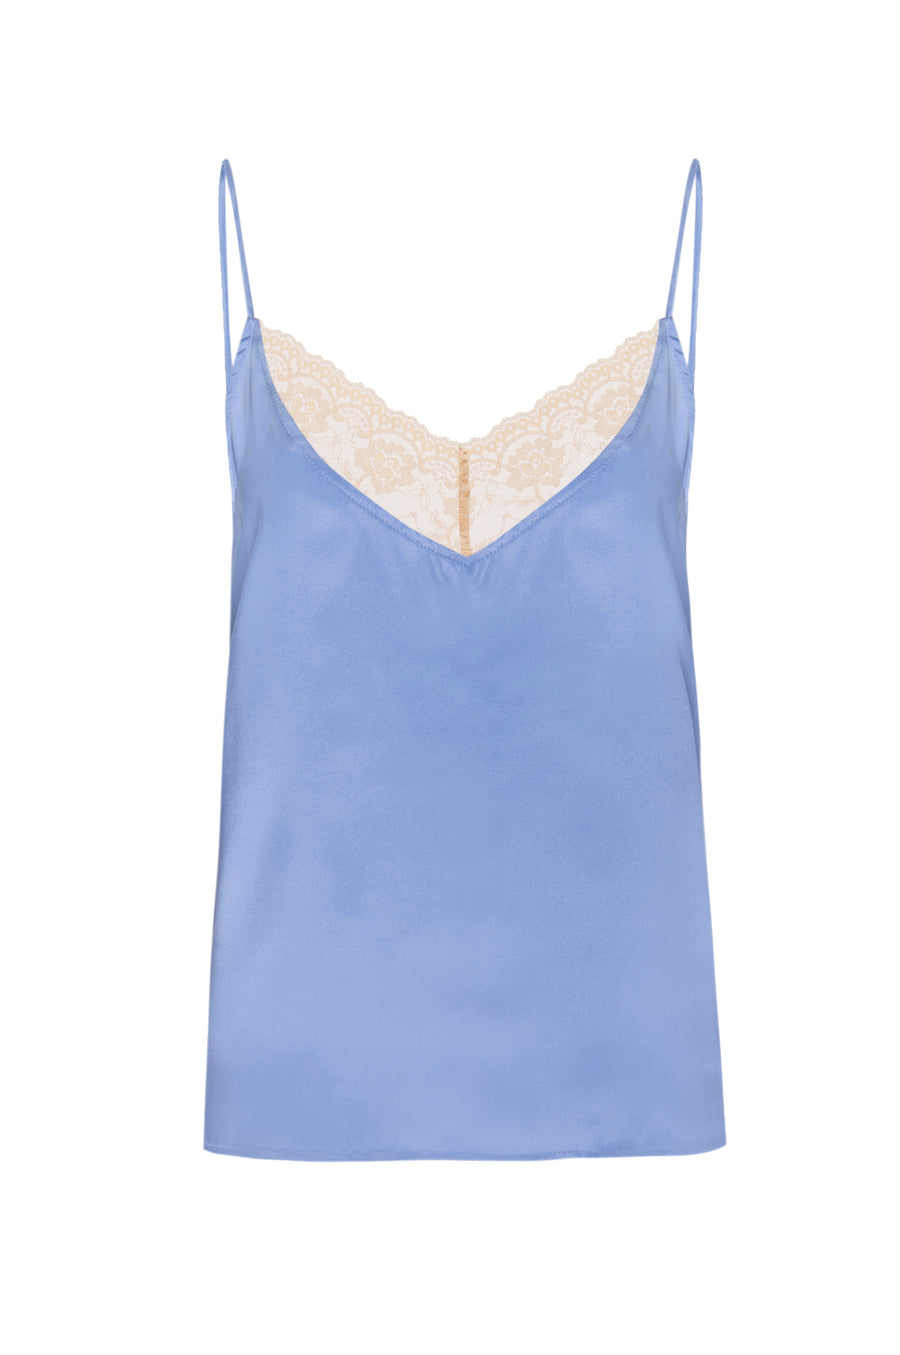 Silk Charmeuse 'August' Tank with Lace: Sky Blue